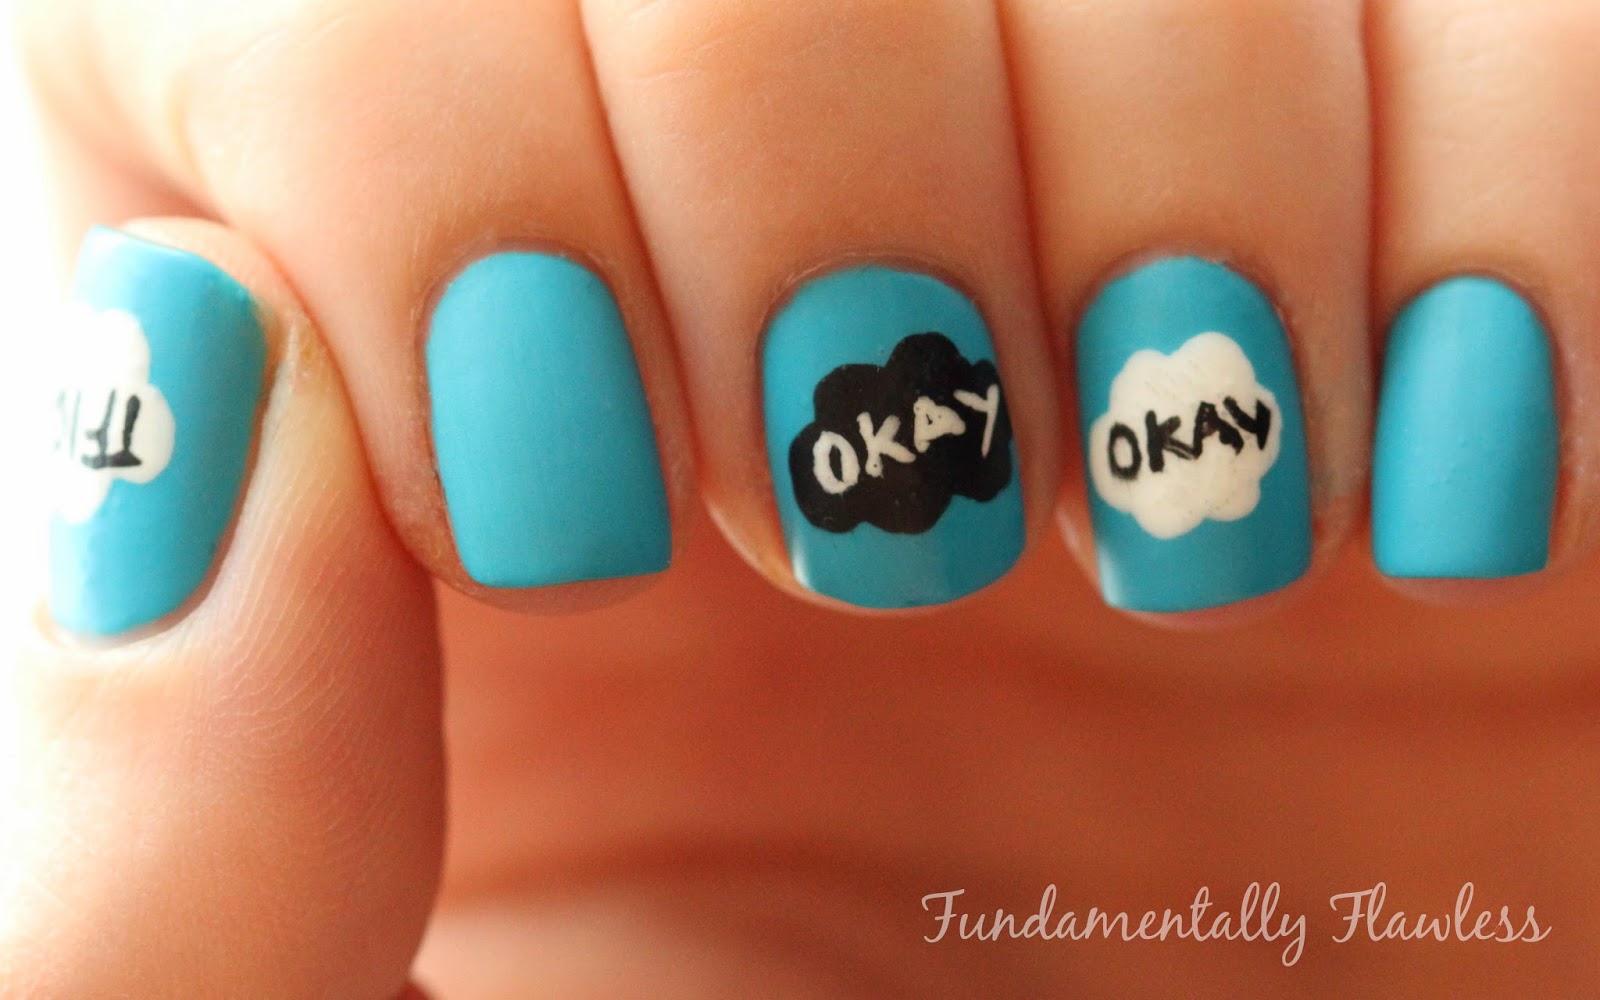 The Fault in Our Stars Nail Art